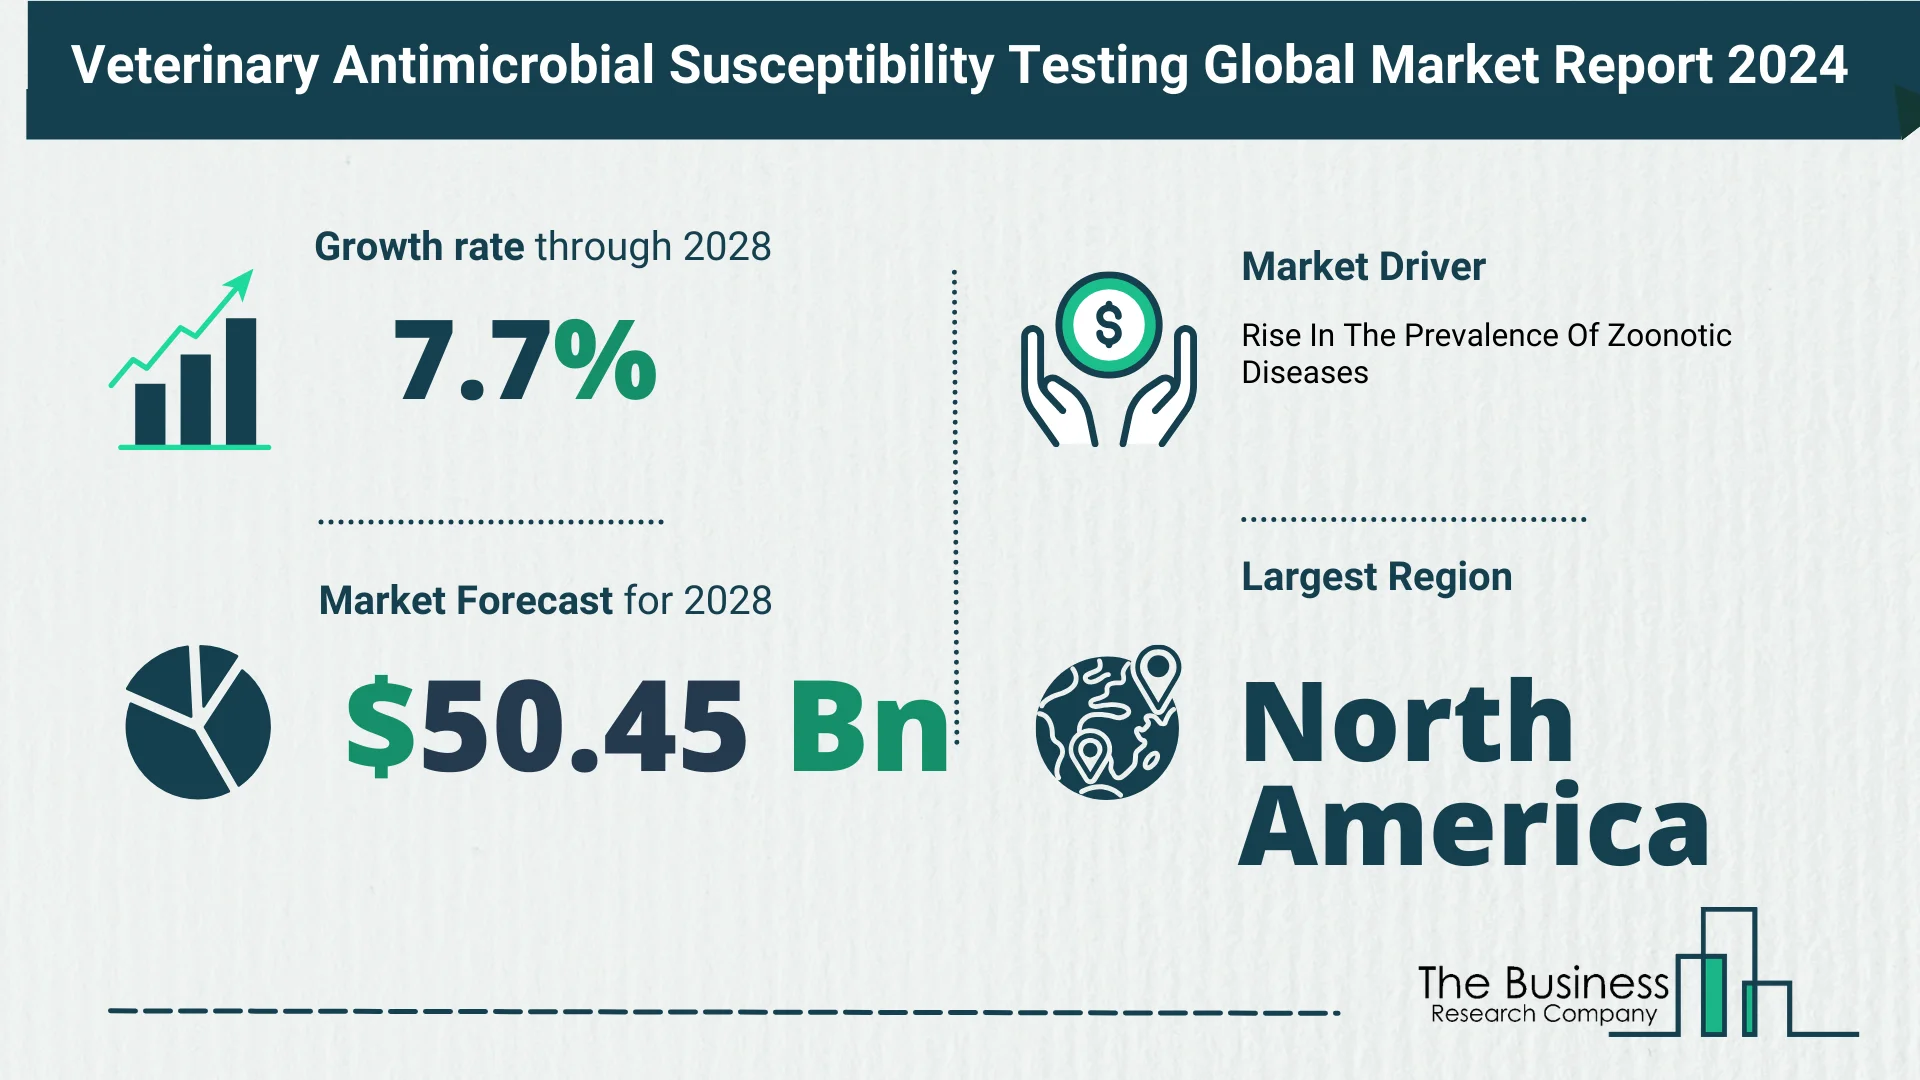 Global Veterinary Antimicrobial Susceptibility Testing Market Trends